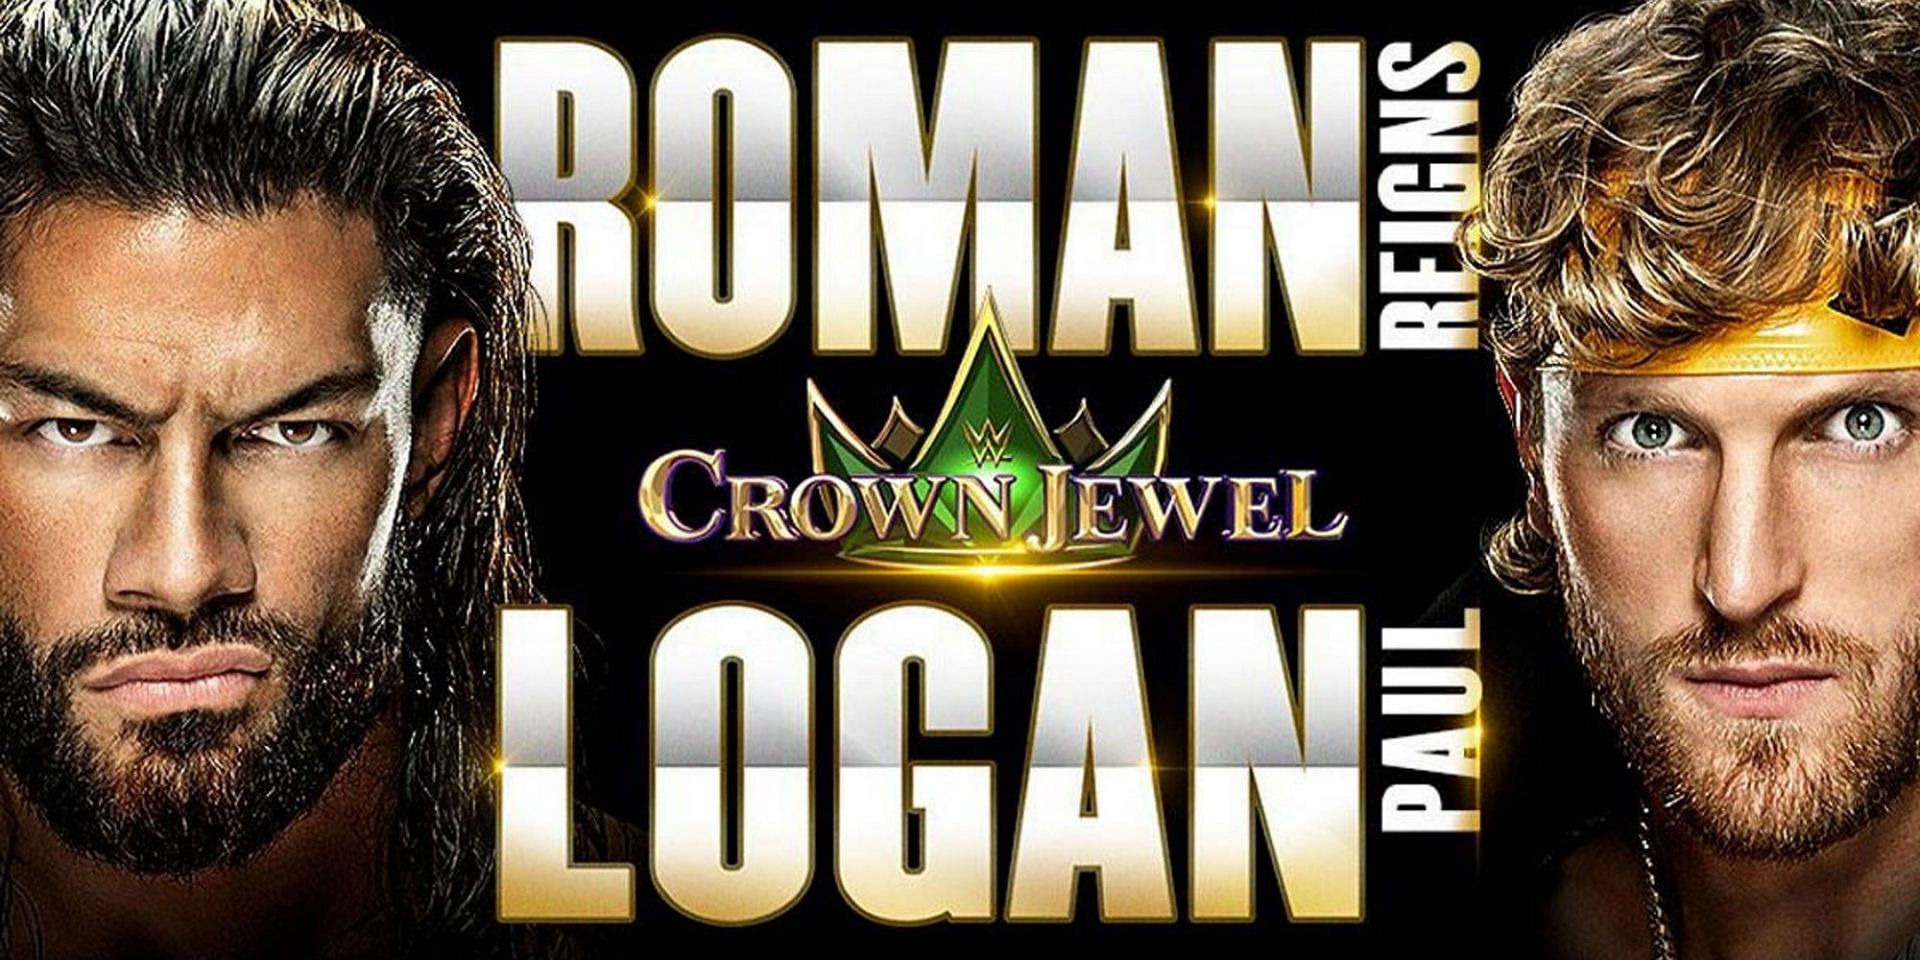 Logan Paul will go one-on-one with Roman Reigns at WWE Crown Jewel. Will we see his brother, Jake Paul, make his WWE debut someday?